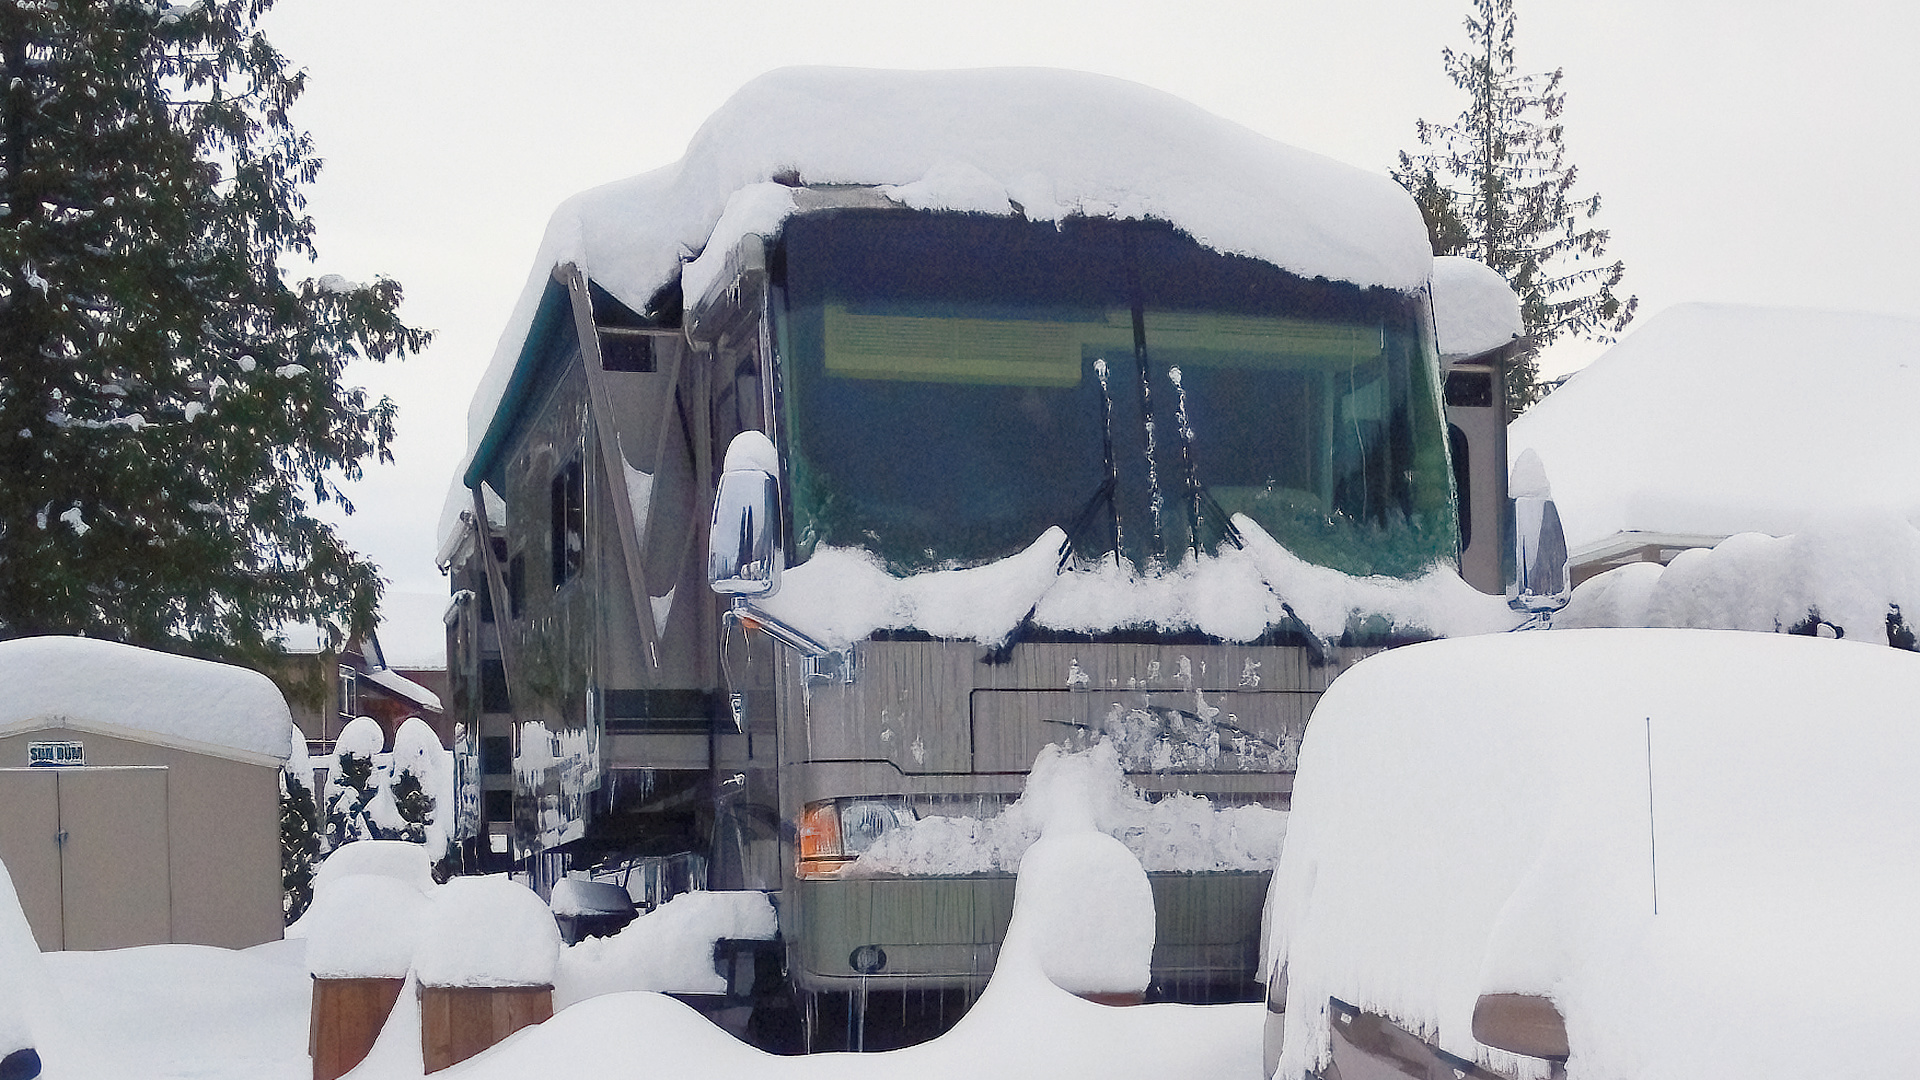 Our RV parked in snow